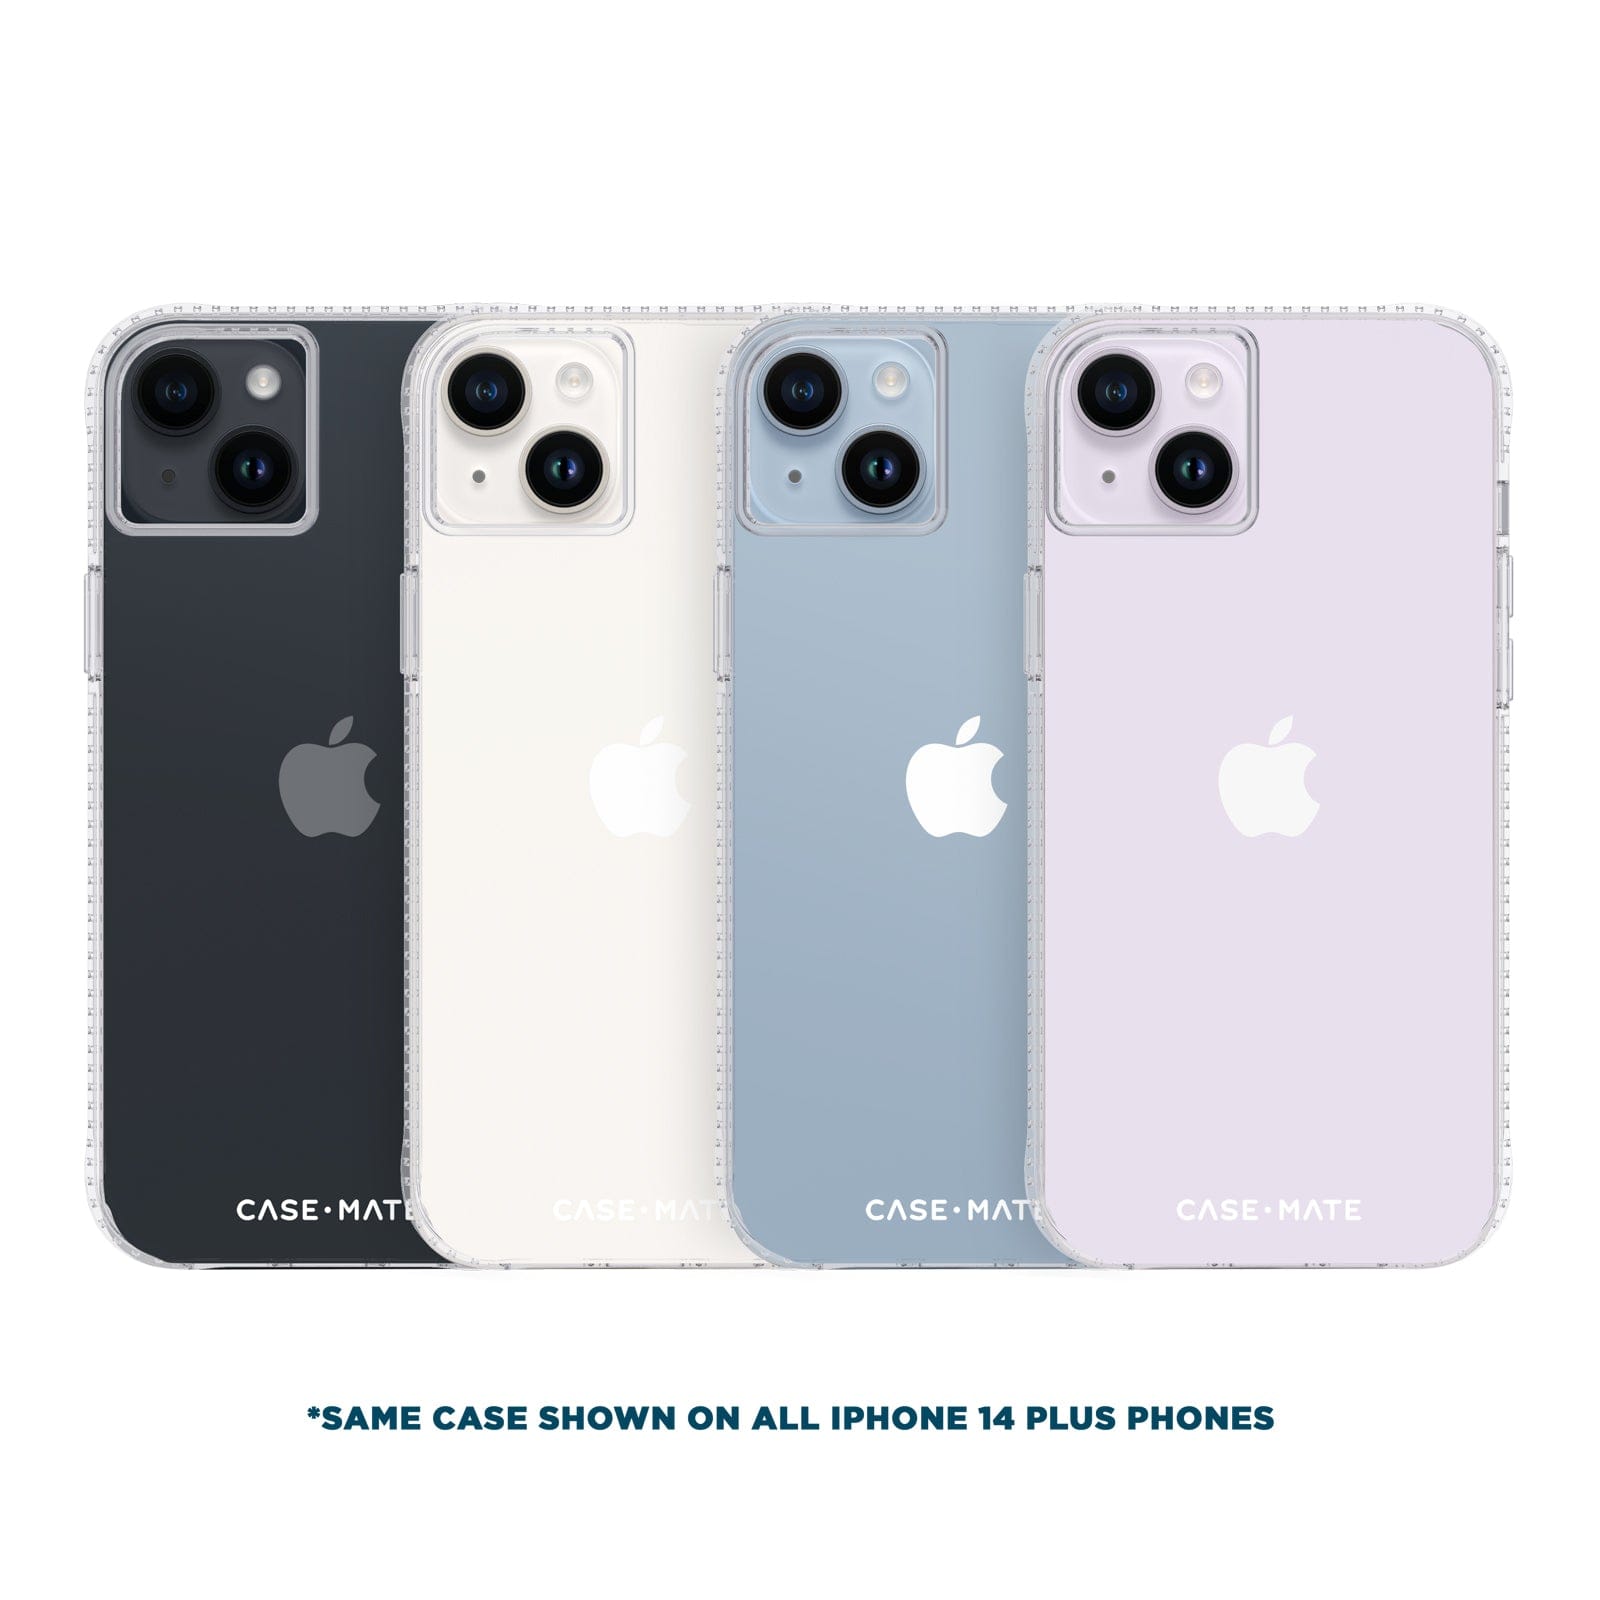 *SAME CASE SHOWN ON ALL IPHONE 14 PLUS PHONES